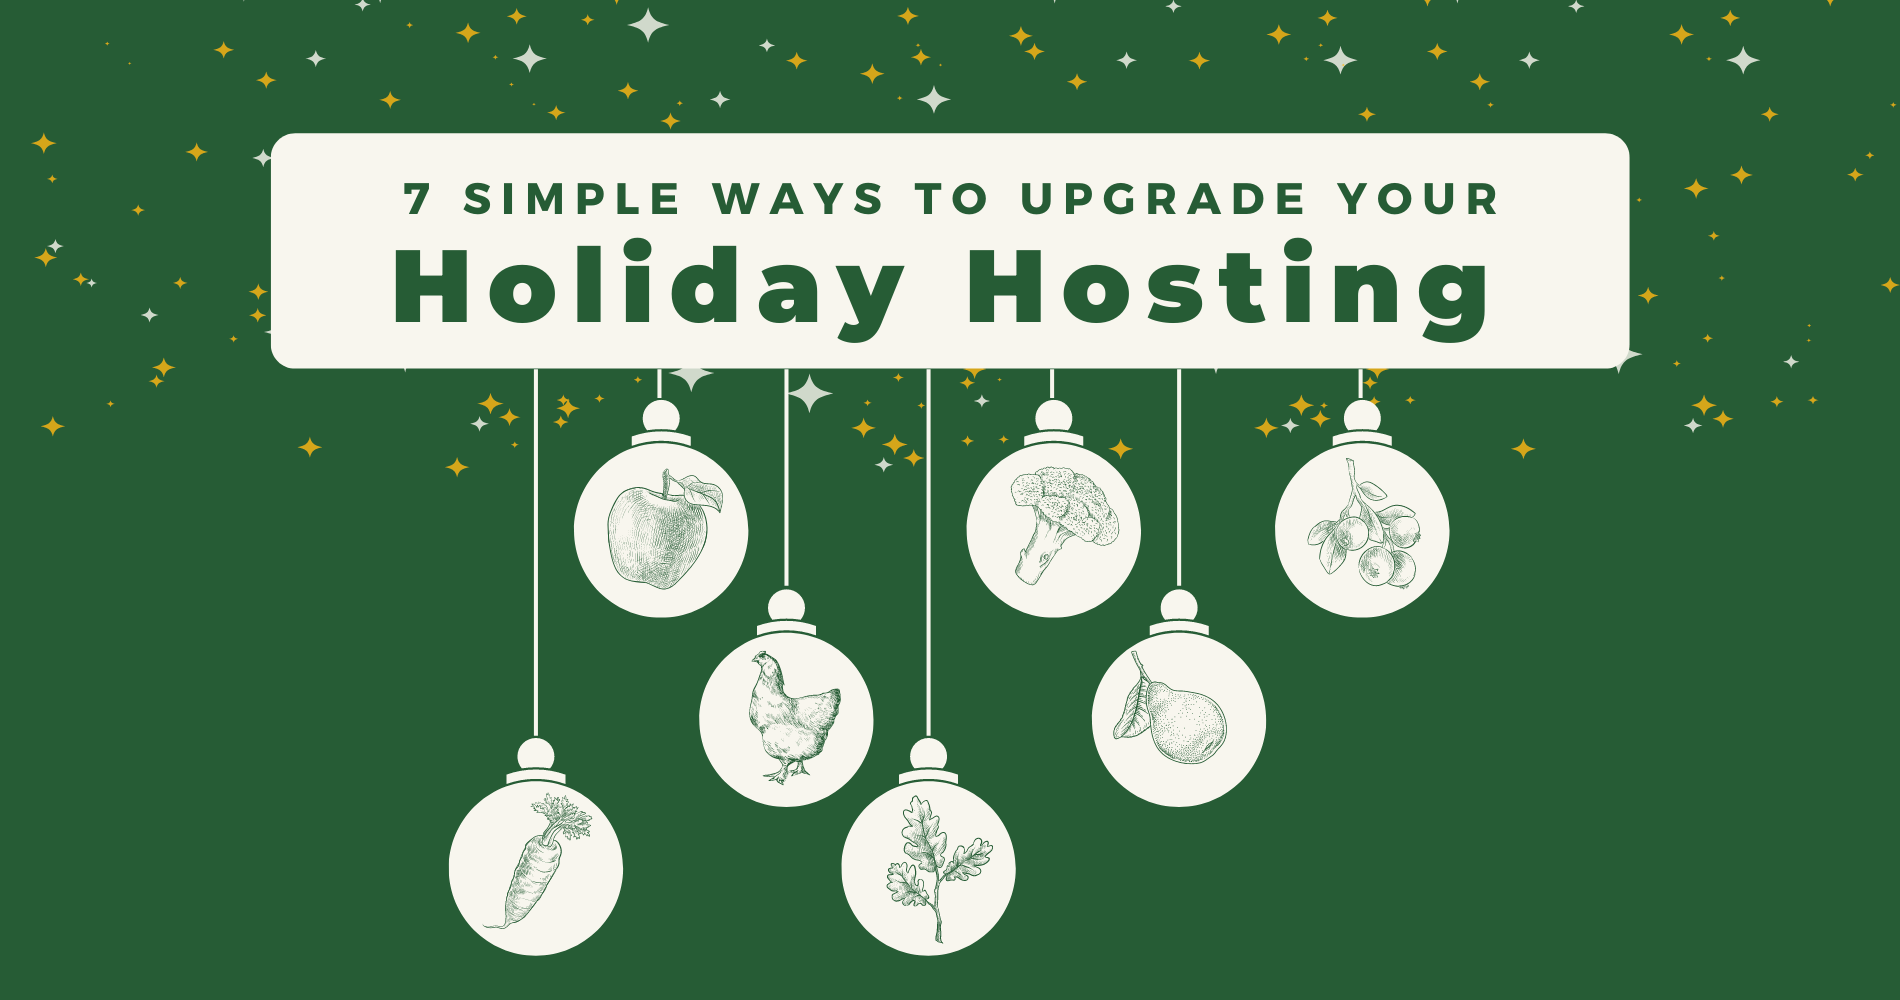 7 Simple Ways to Upgrade Your Holiday Hosting image